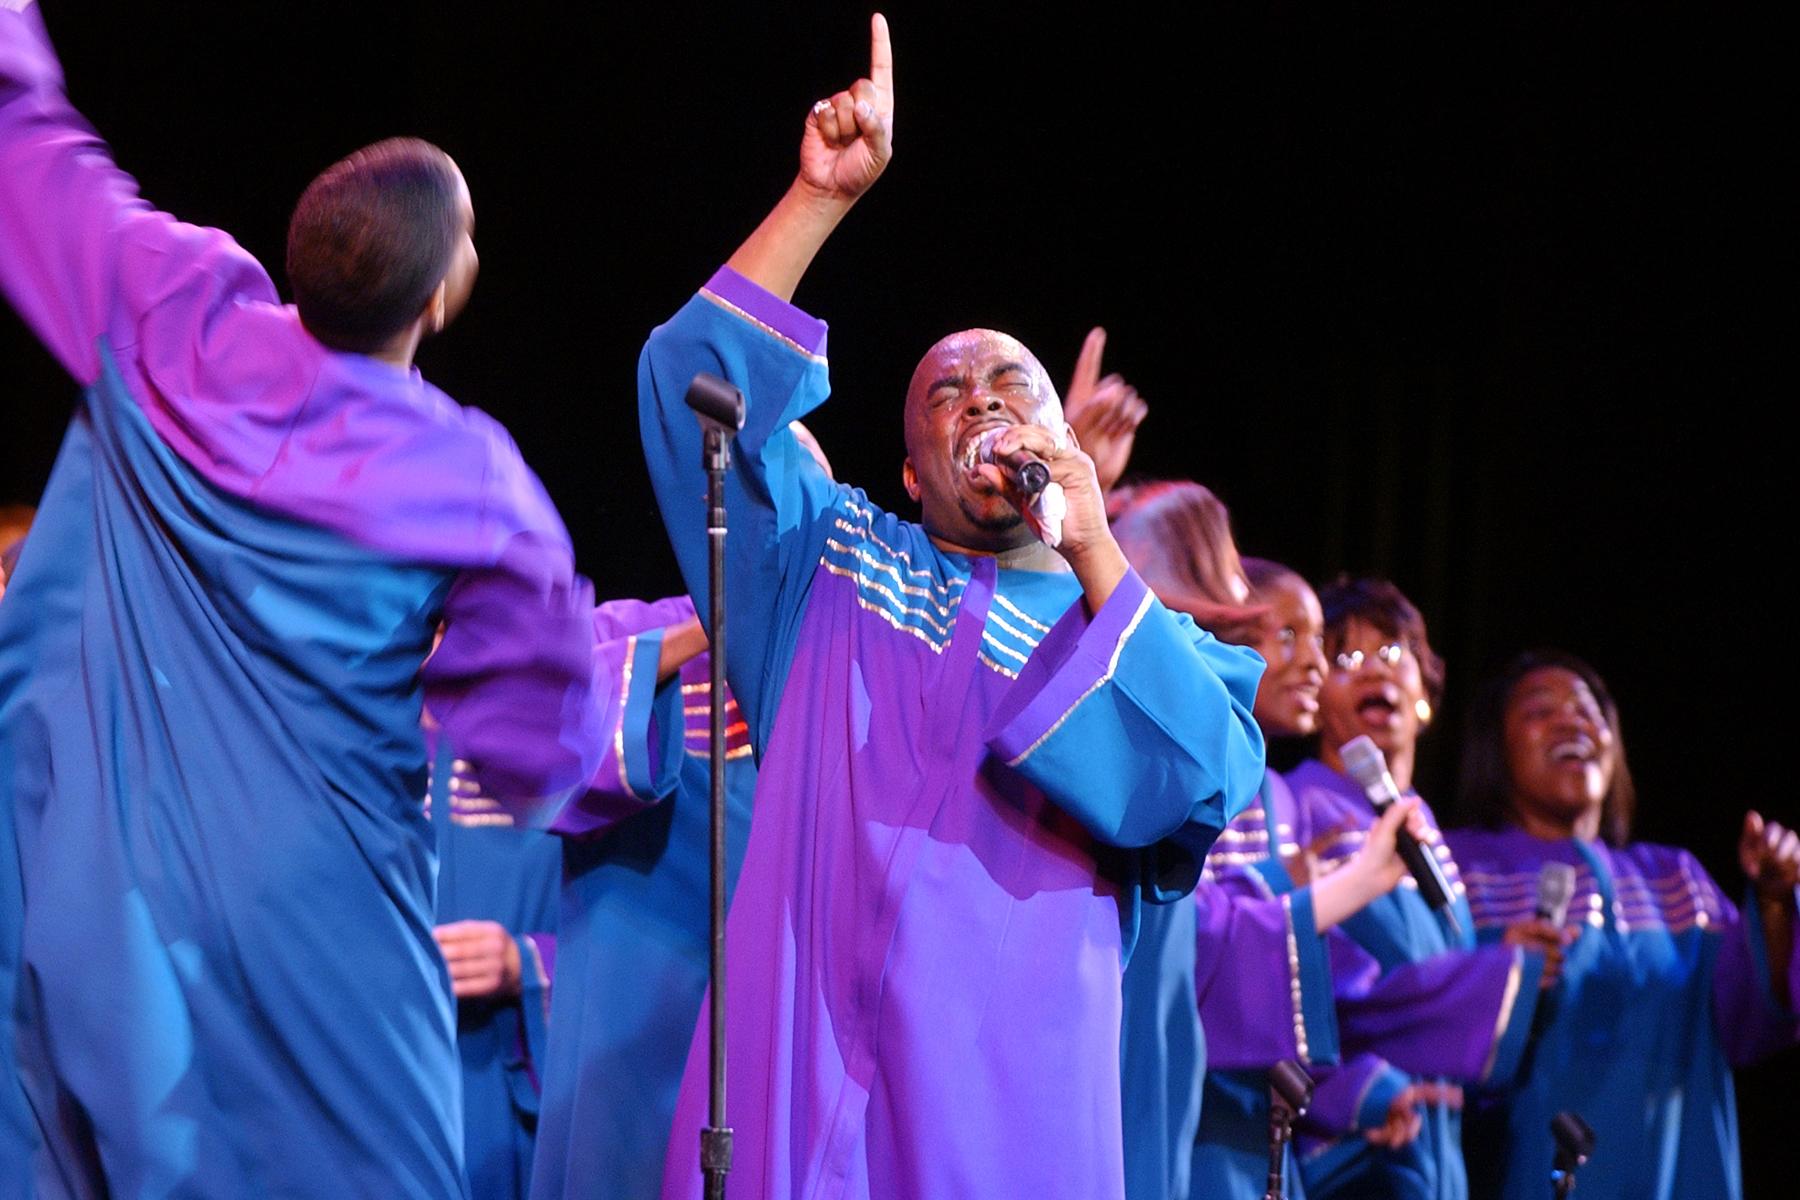 Sean Connelley - 12/6/03

Oakland Interfaith Gospel Choir performing at Paramount Theater in Oakland, CA.